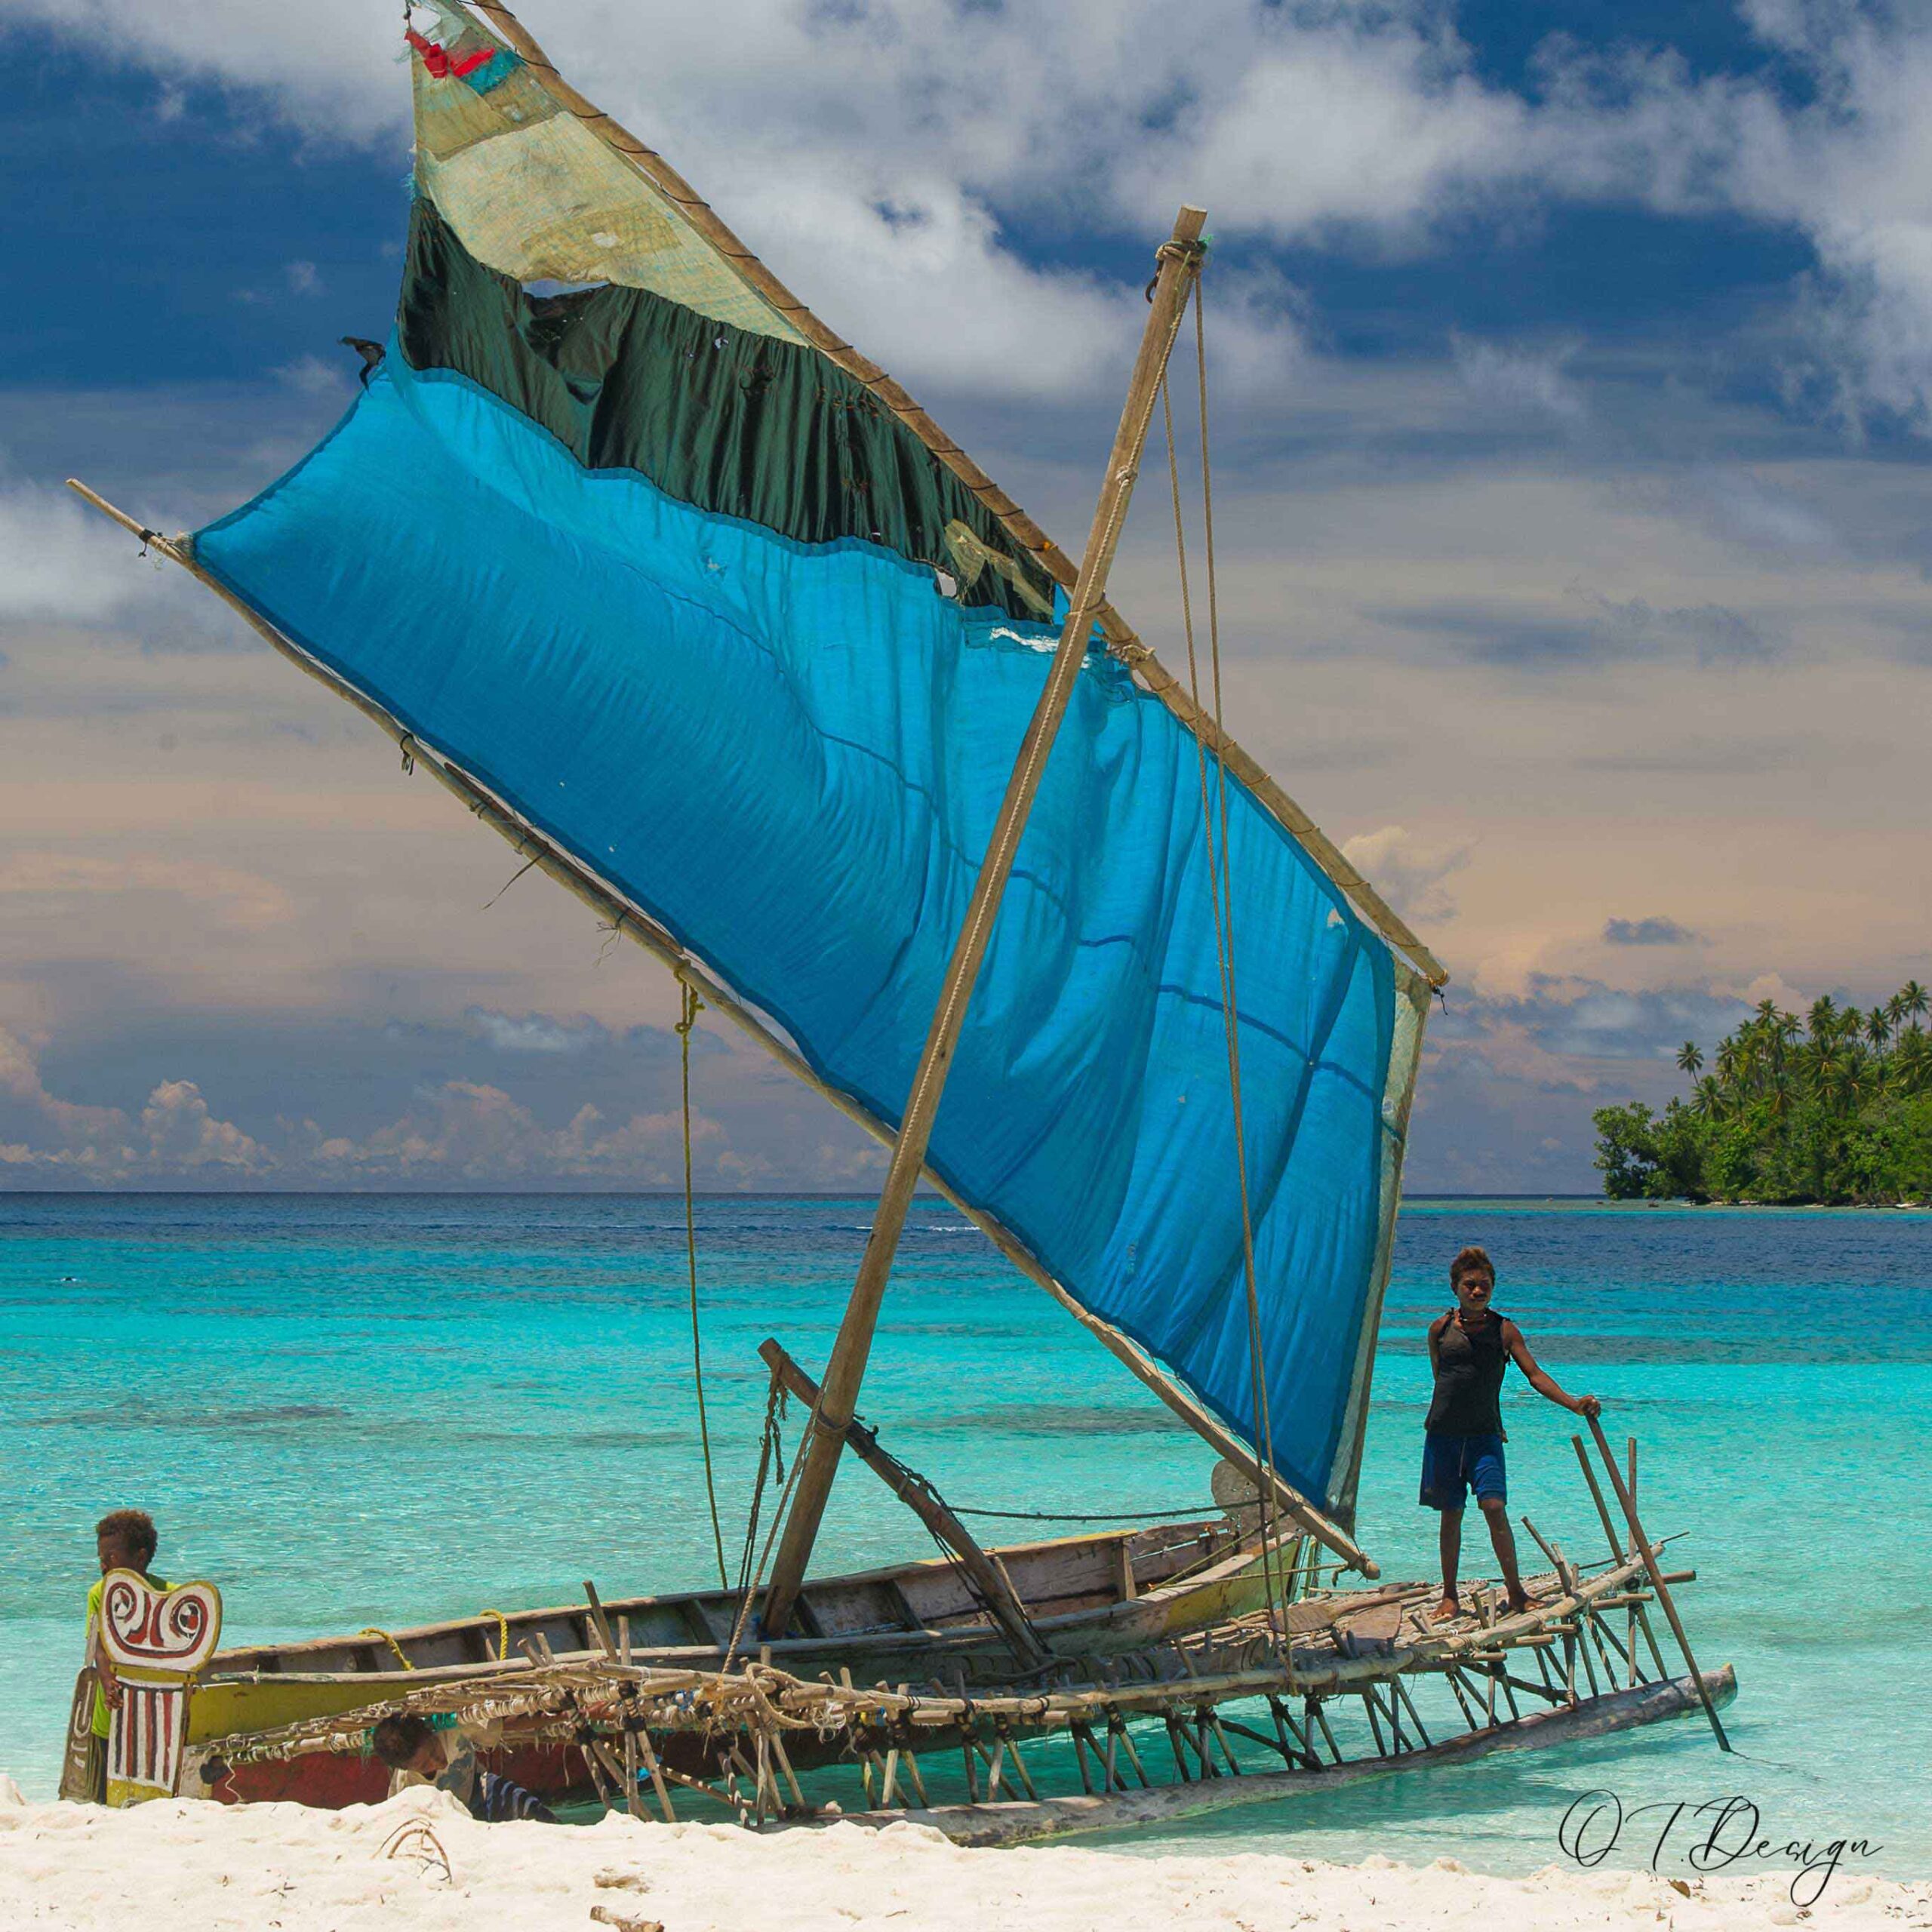 A traditional boat with two young local kids against the paradise view with tourquoise water and white sand in Kitava Island, Papua New Guinea